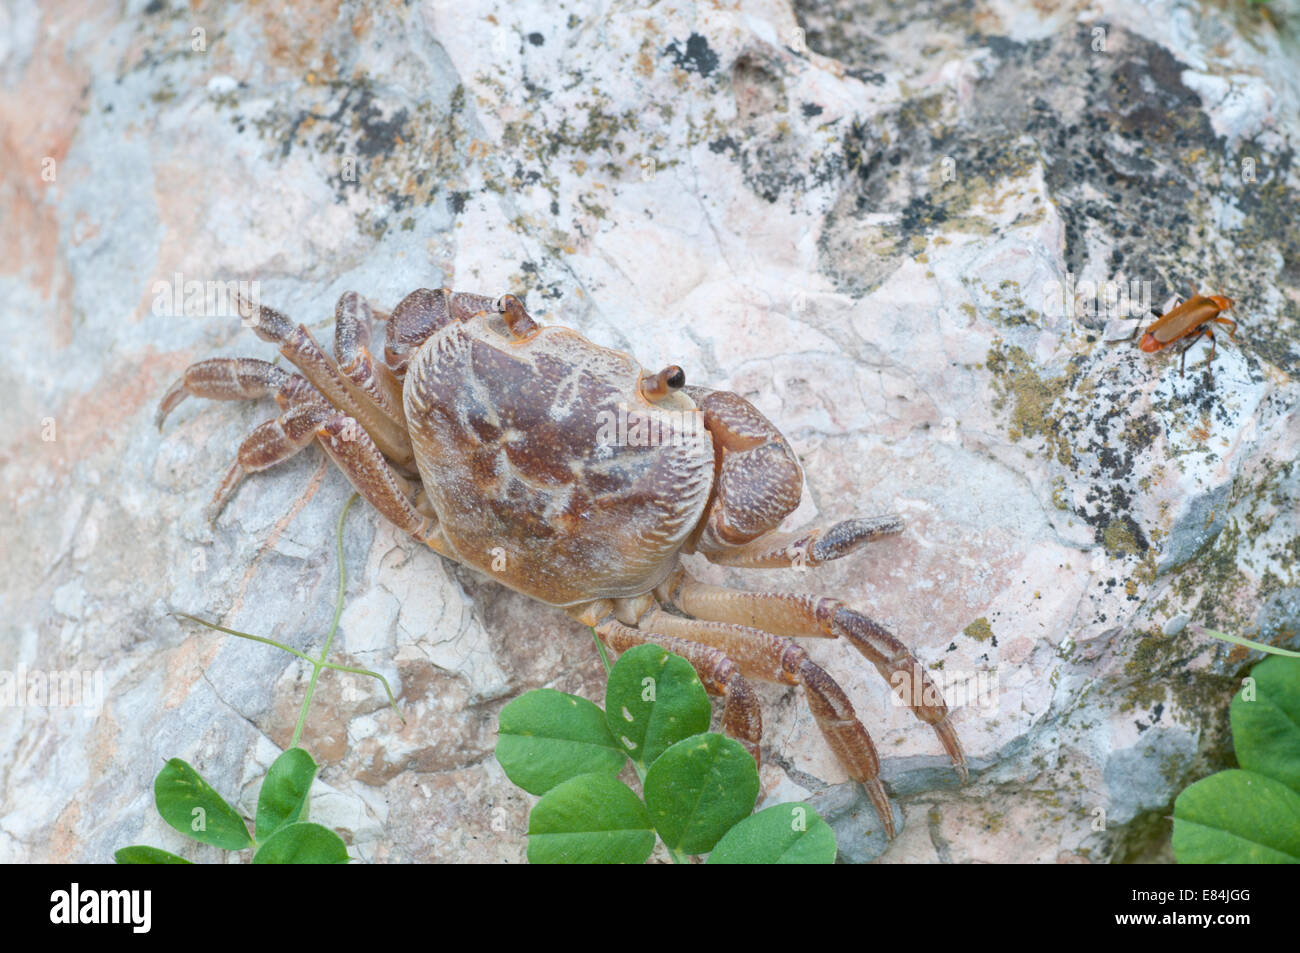 A shot of the semi-terrestrial Leventine freshwater crab resting on a rock in Jordan Stock Photo